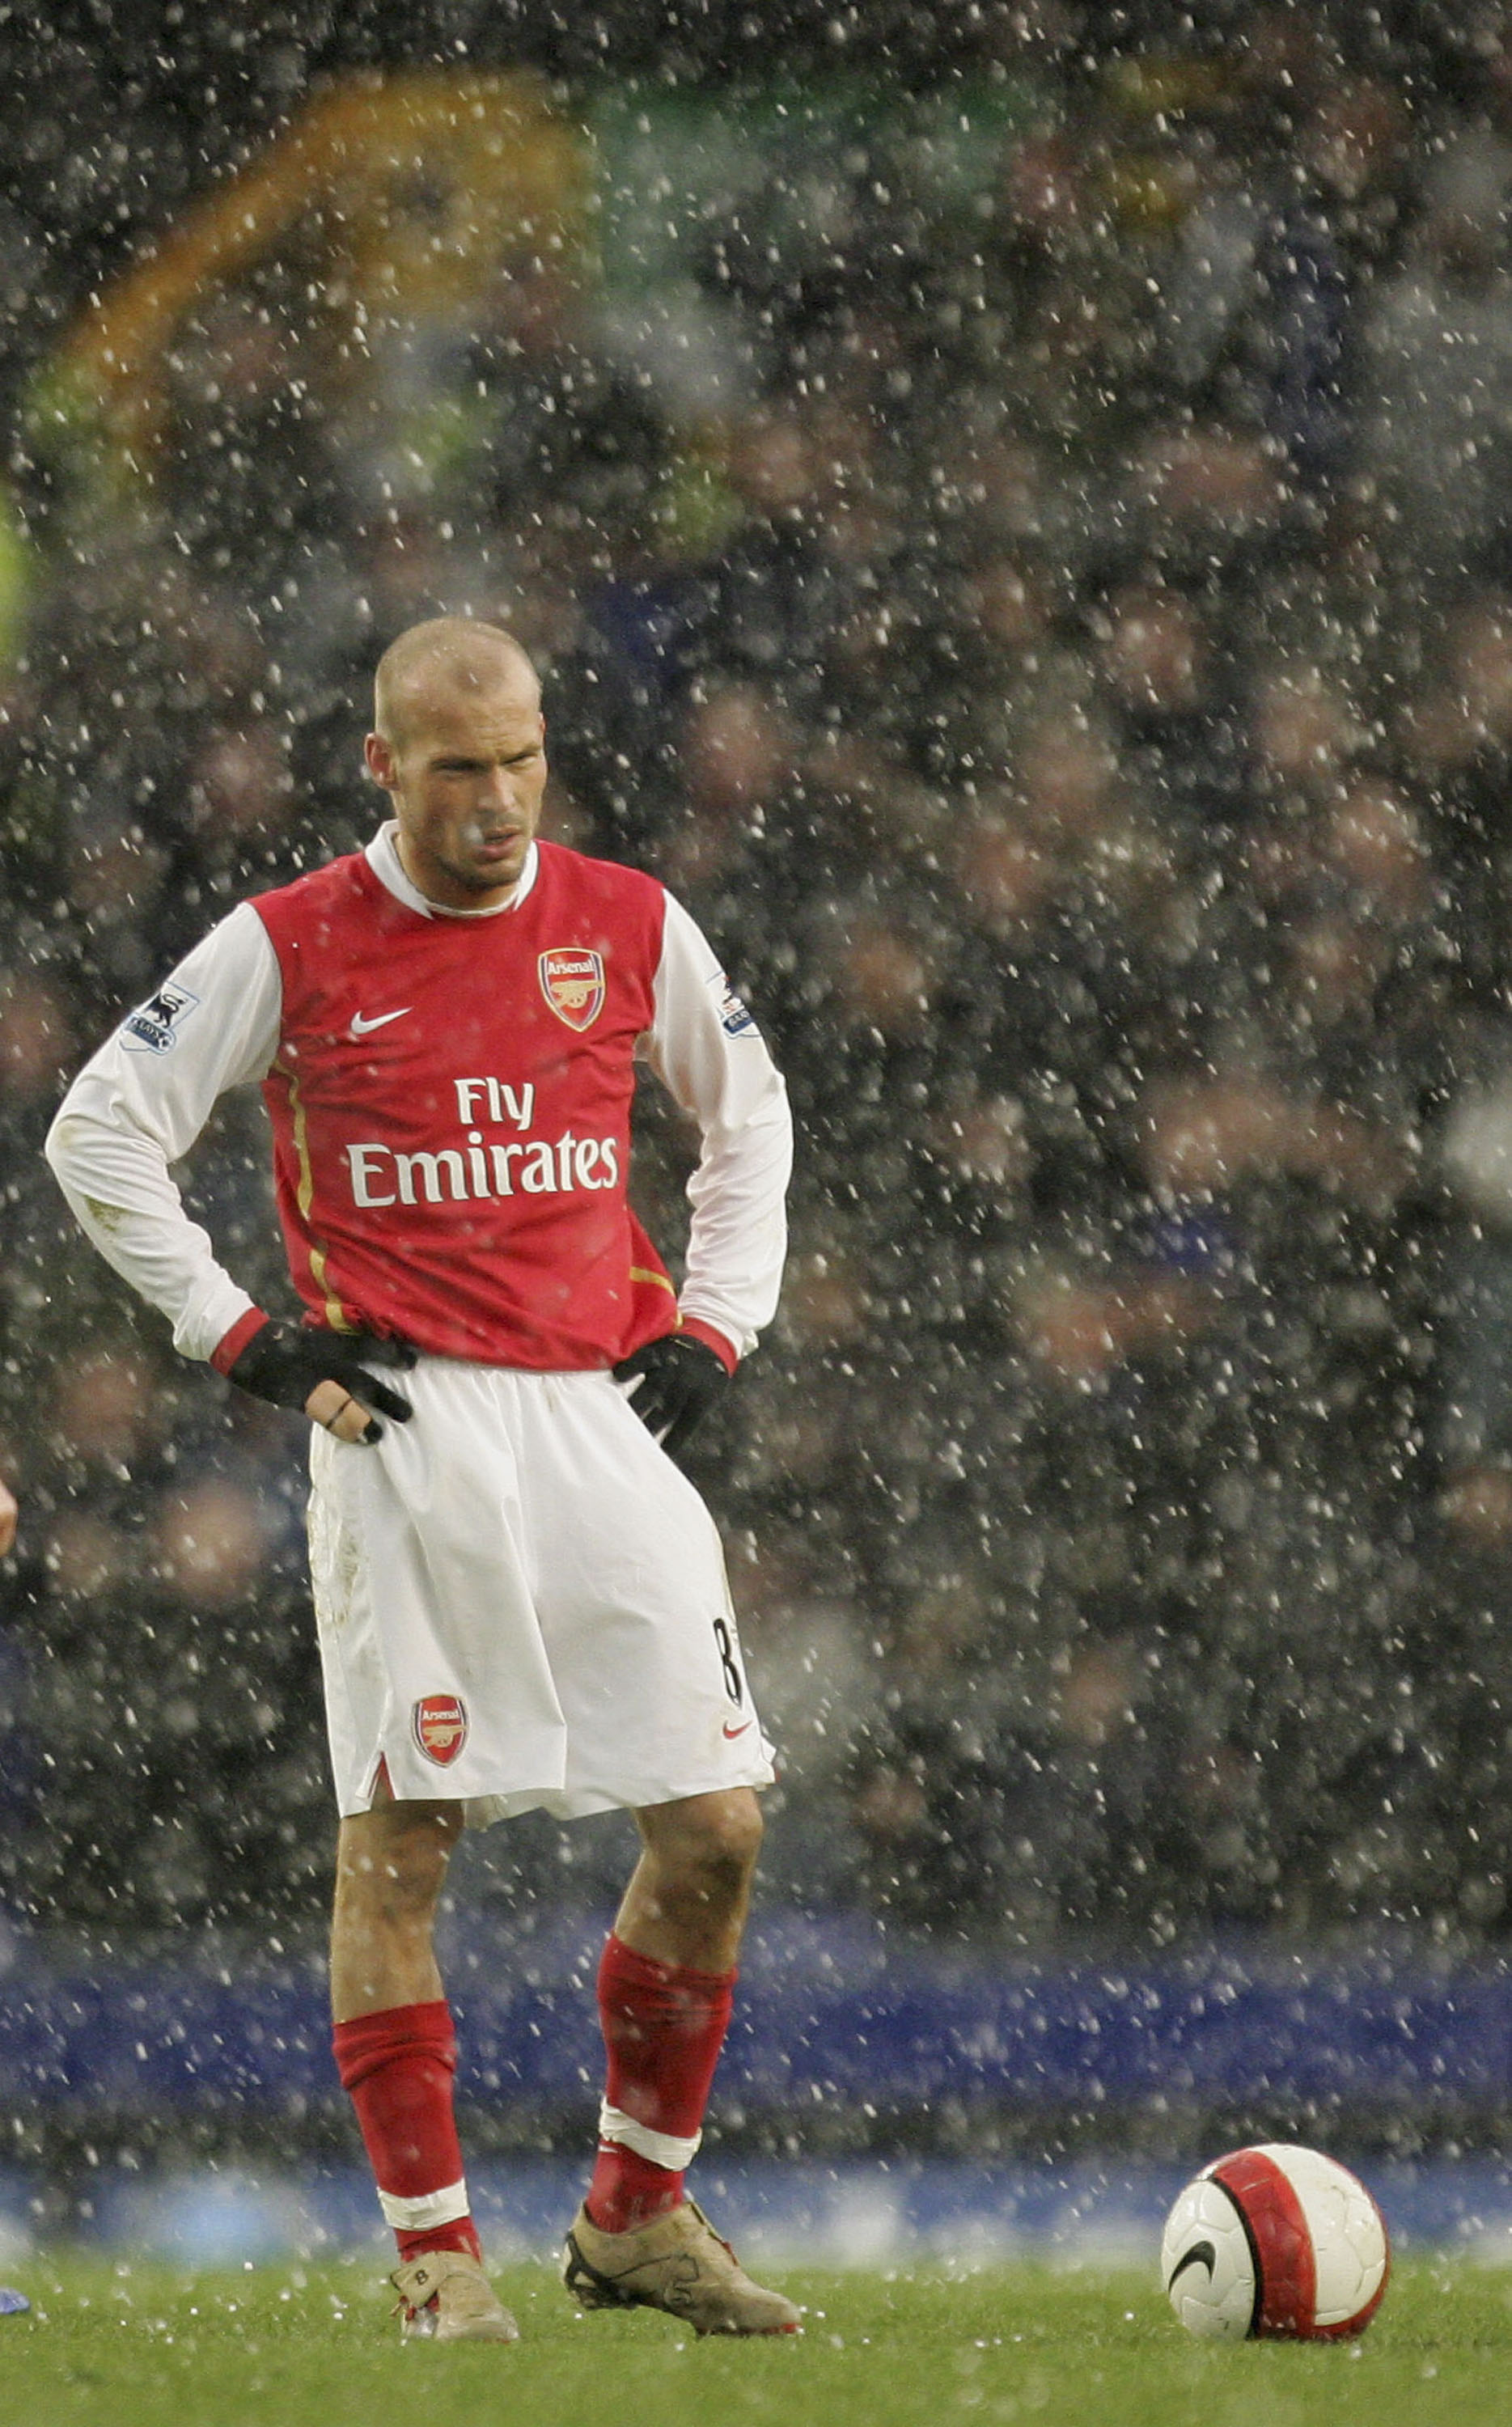 LIVERPOOL, UNITED KINGDOM - MARCH 18:  Fredrik Ljungberg of Arsenal looks disappointed after Andy Johnson of Everton scores the winner during the Barclays Premiership match between Everton and Arsenal at Goodison Park on March 18, 2007 in Liverpool, Engla